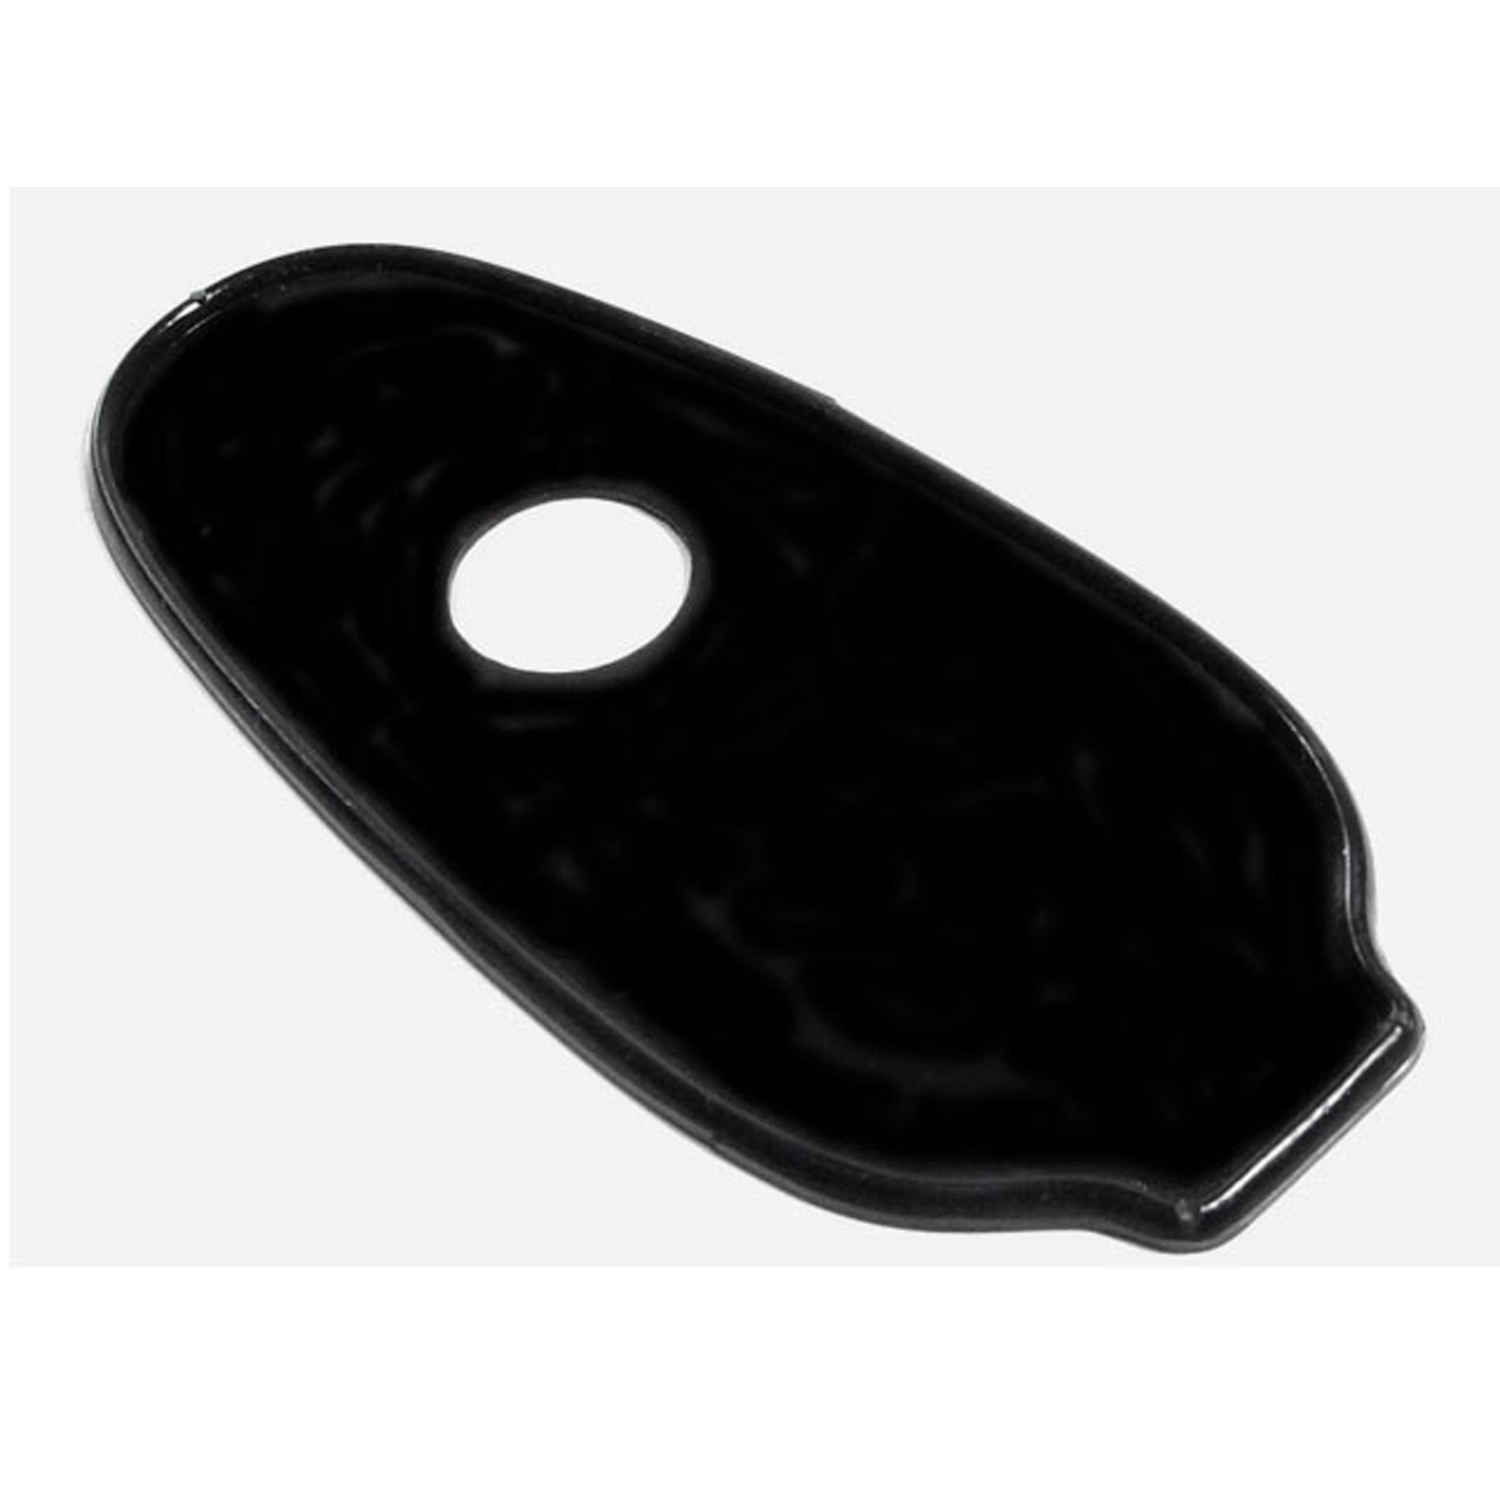 1952 Chrysler Town & Country Tailgate Handle Pad.  2-3/4 wide X 5-7/8 long.  Each-MP 551-A